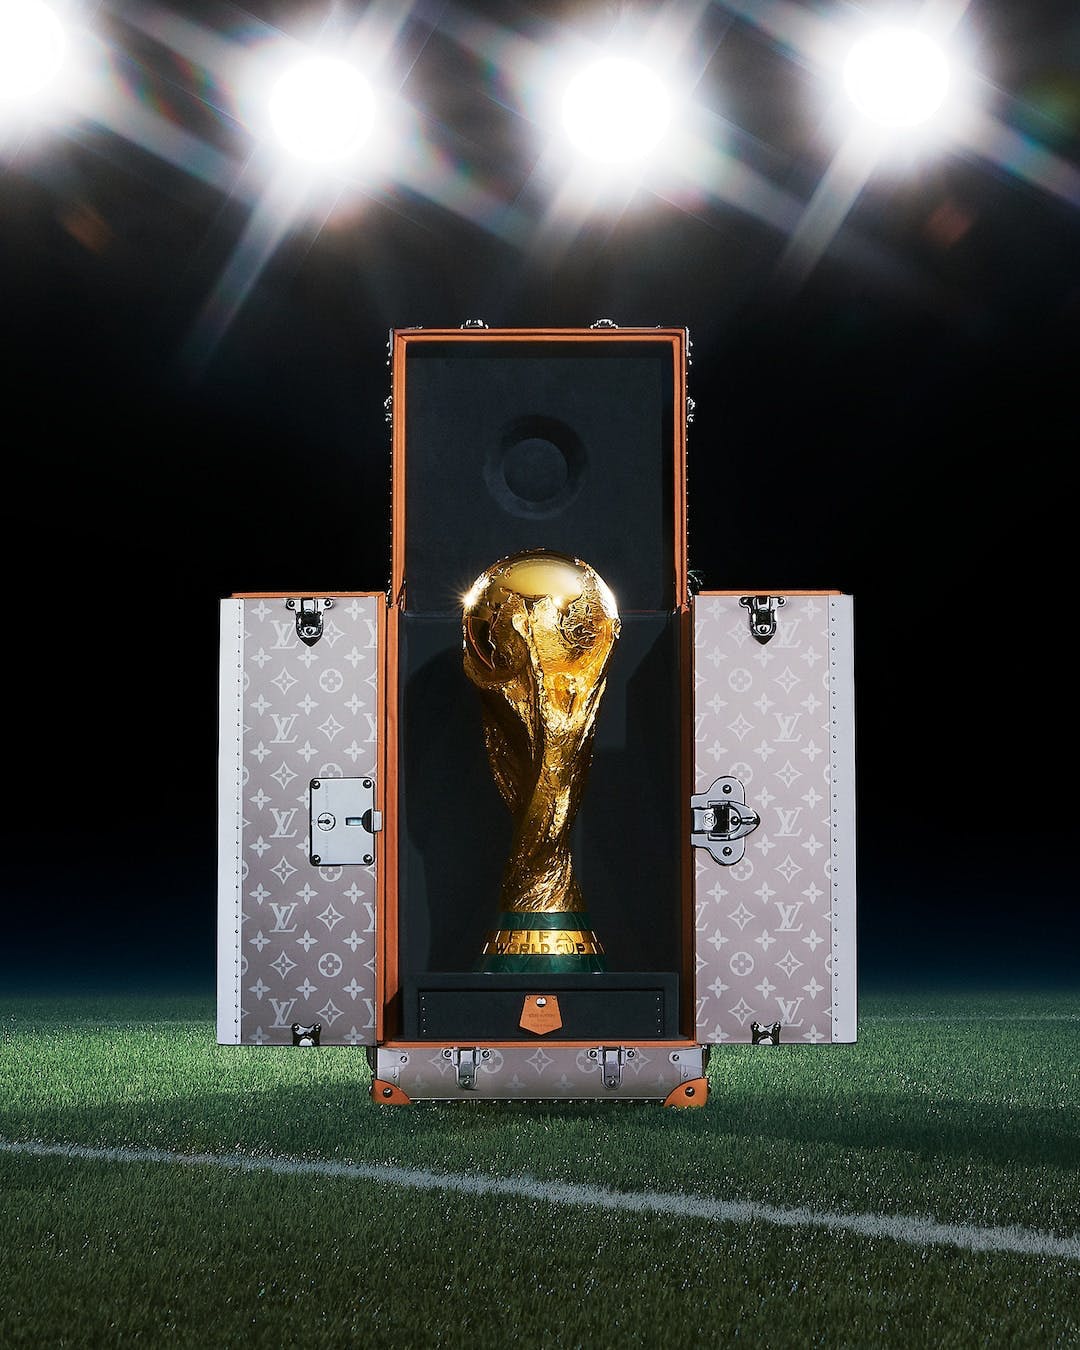 Louis Vuitton Deepens Relationship With FIFA in Runup to World Cup  WWD